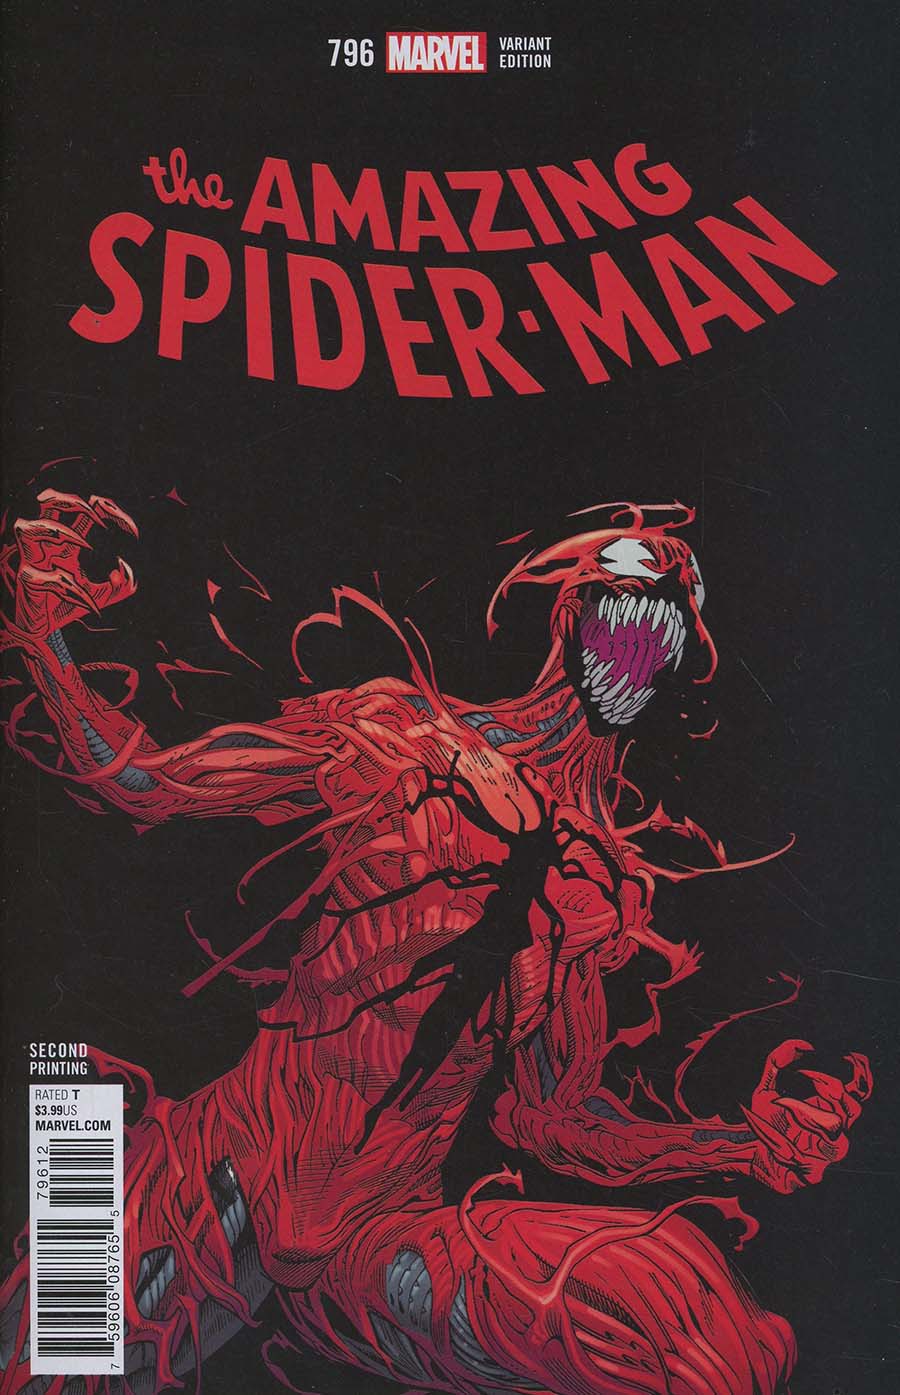 Amazing Spider-Man Vol 4 #796 Cover B 2nd Ptg Variant Mike Hawthorne Cover (Marvel Legacy Tie-In)